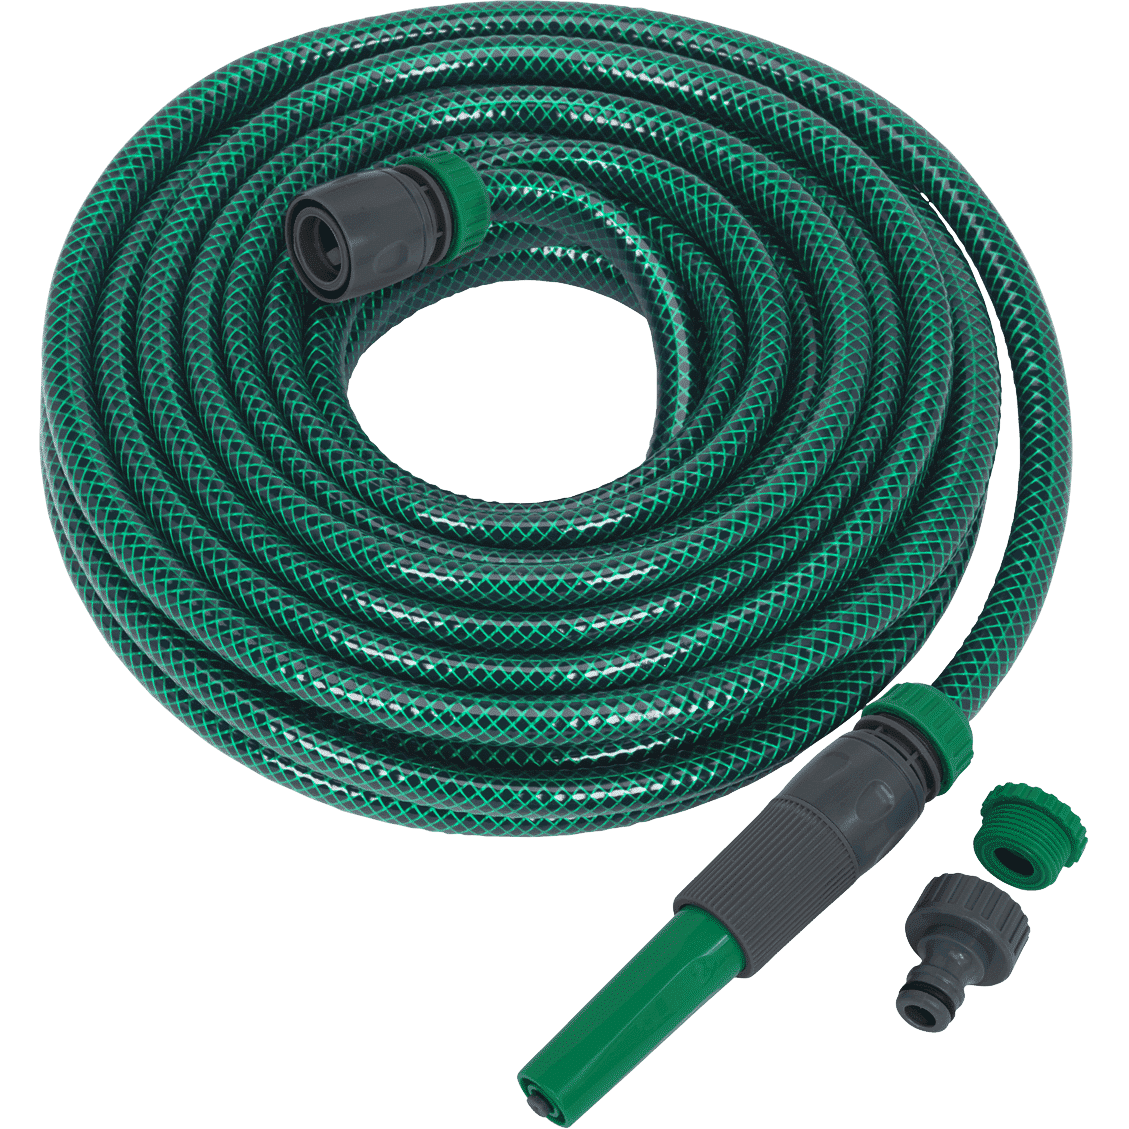 30m Garden Hose With Fittings